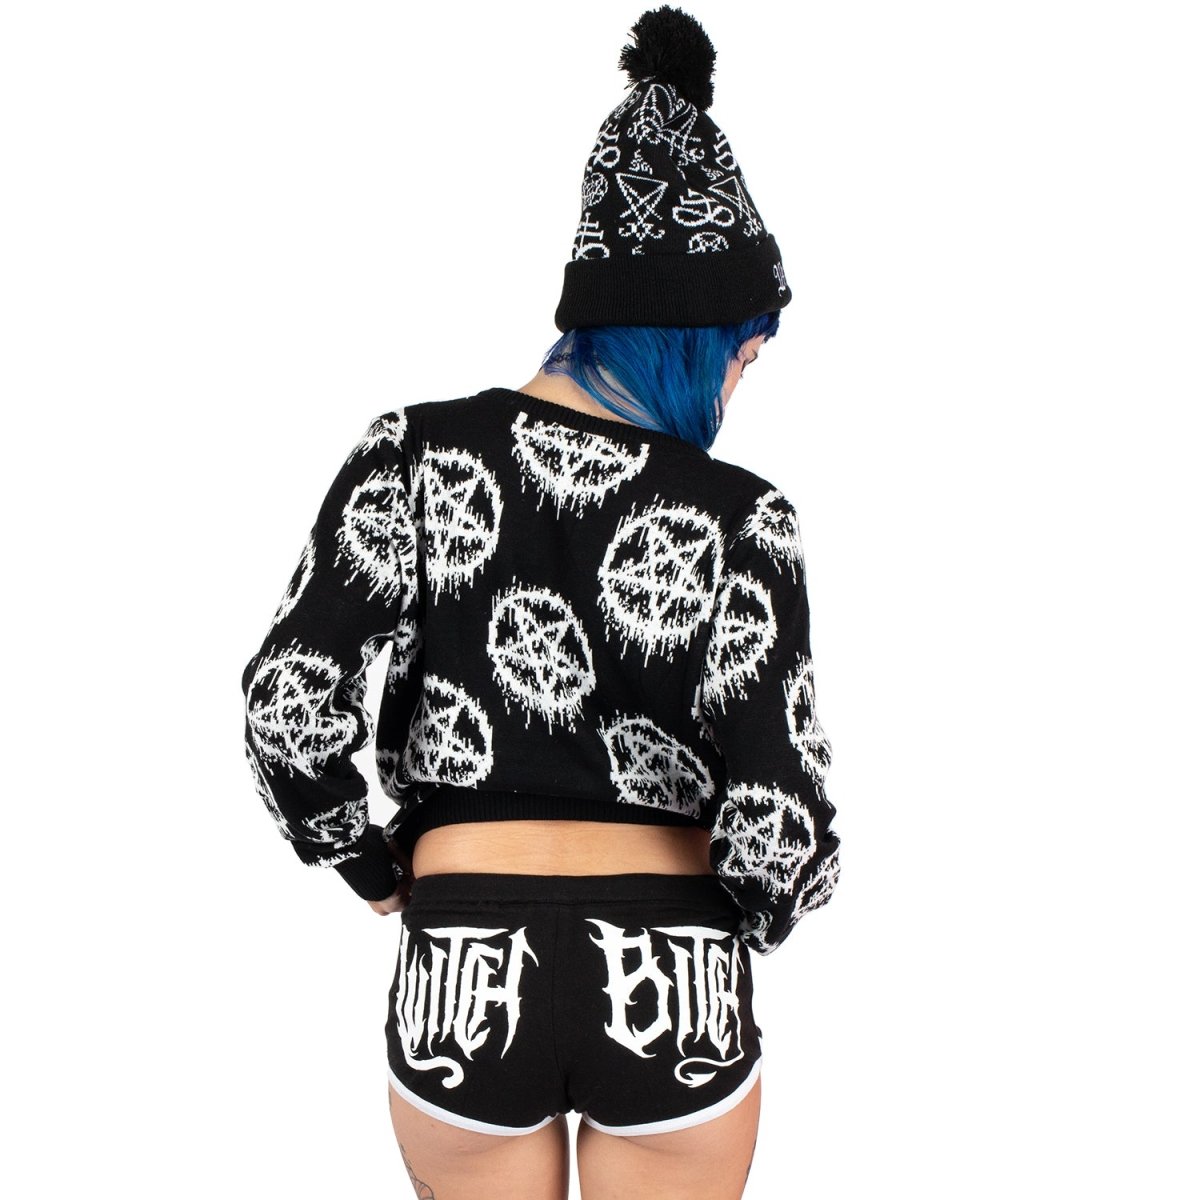 Too Fast | Witch Bitch White Trim Black Dolphin Shorts